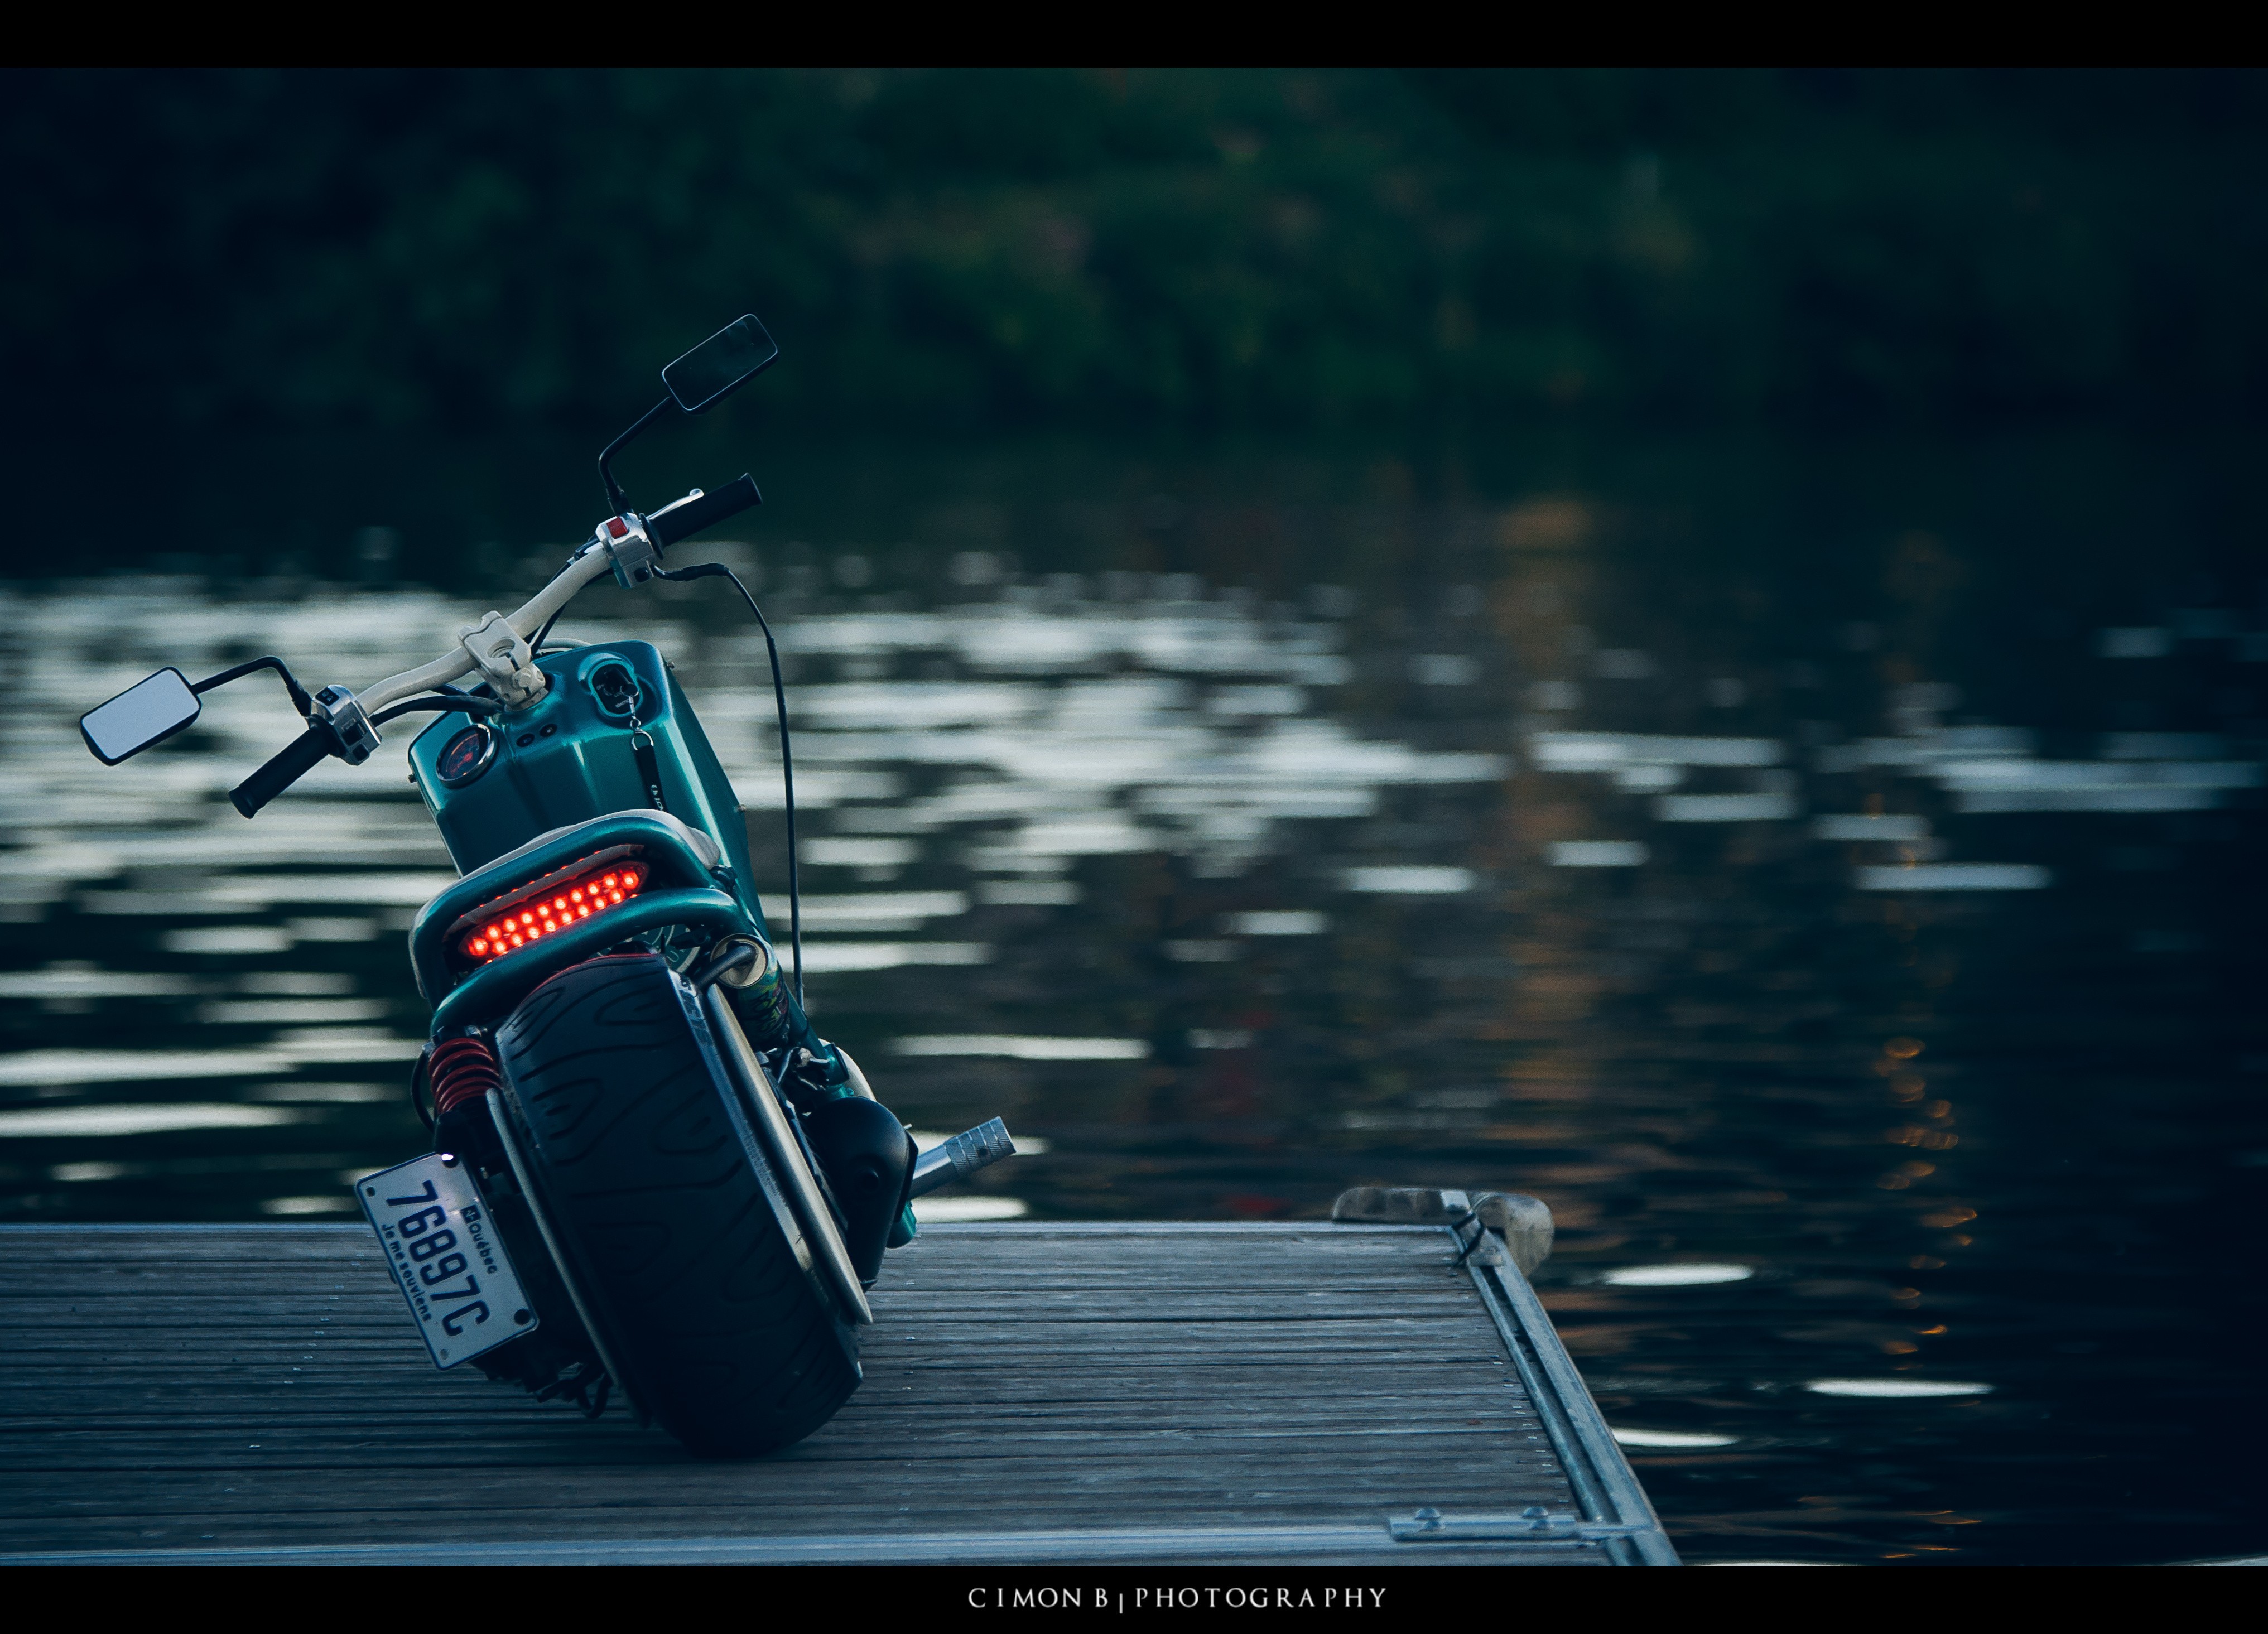 General 4065x2929 vehicle nature water motorcycle river pier